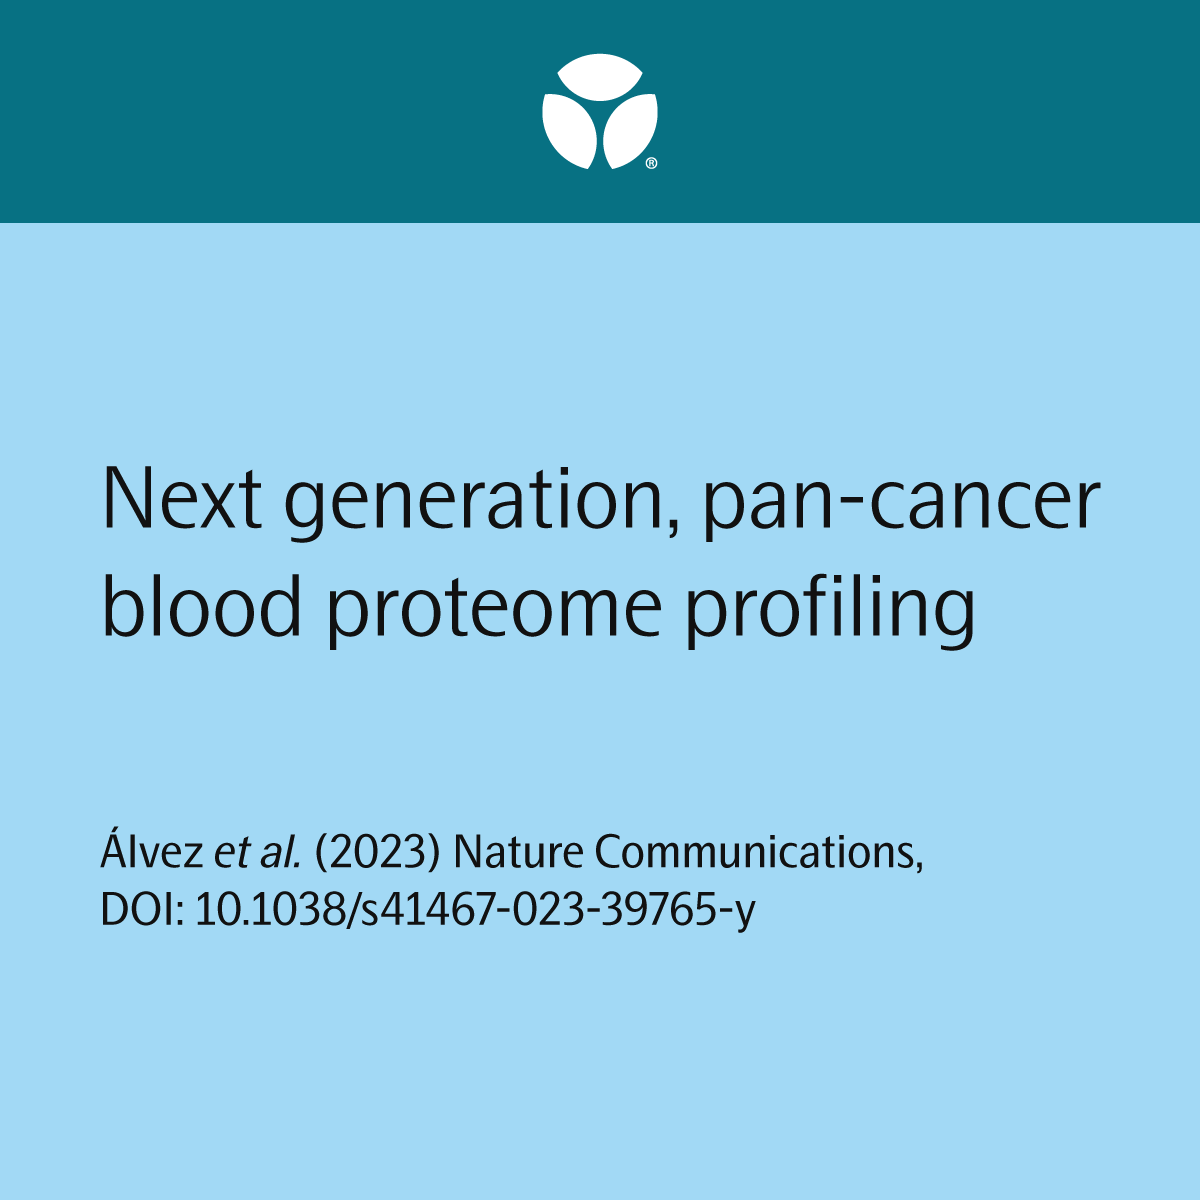 Next generation pan-cancer blood proteome profiling